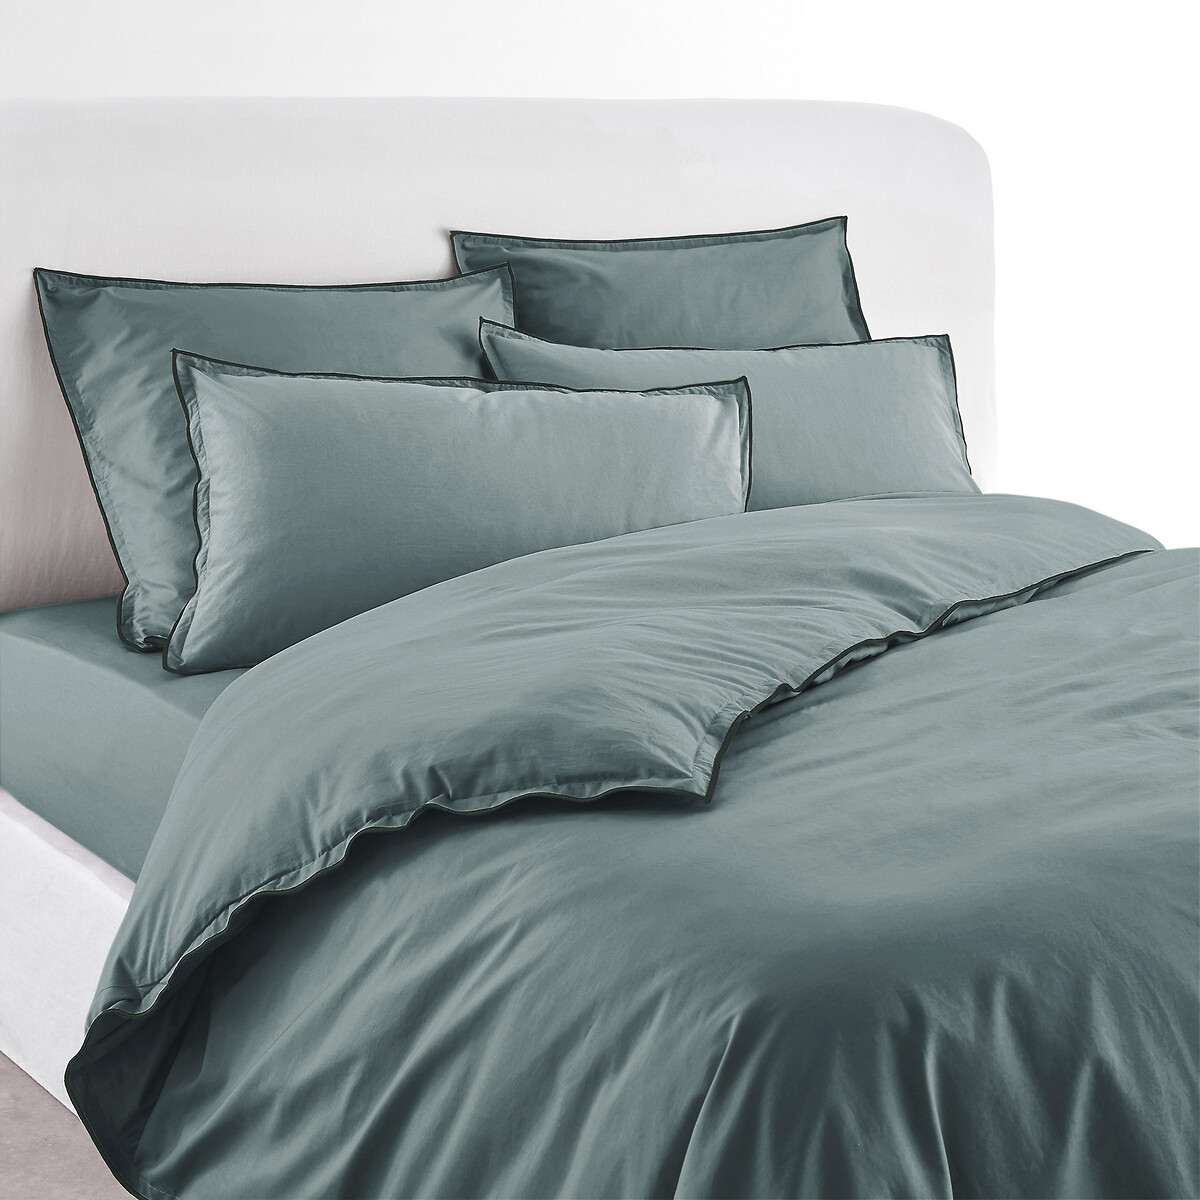 Washed Organic Cotton 400 Thread Count, Blue Green White Duvet Cover